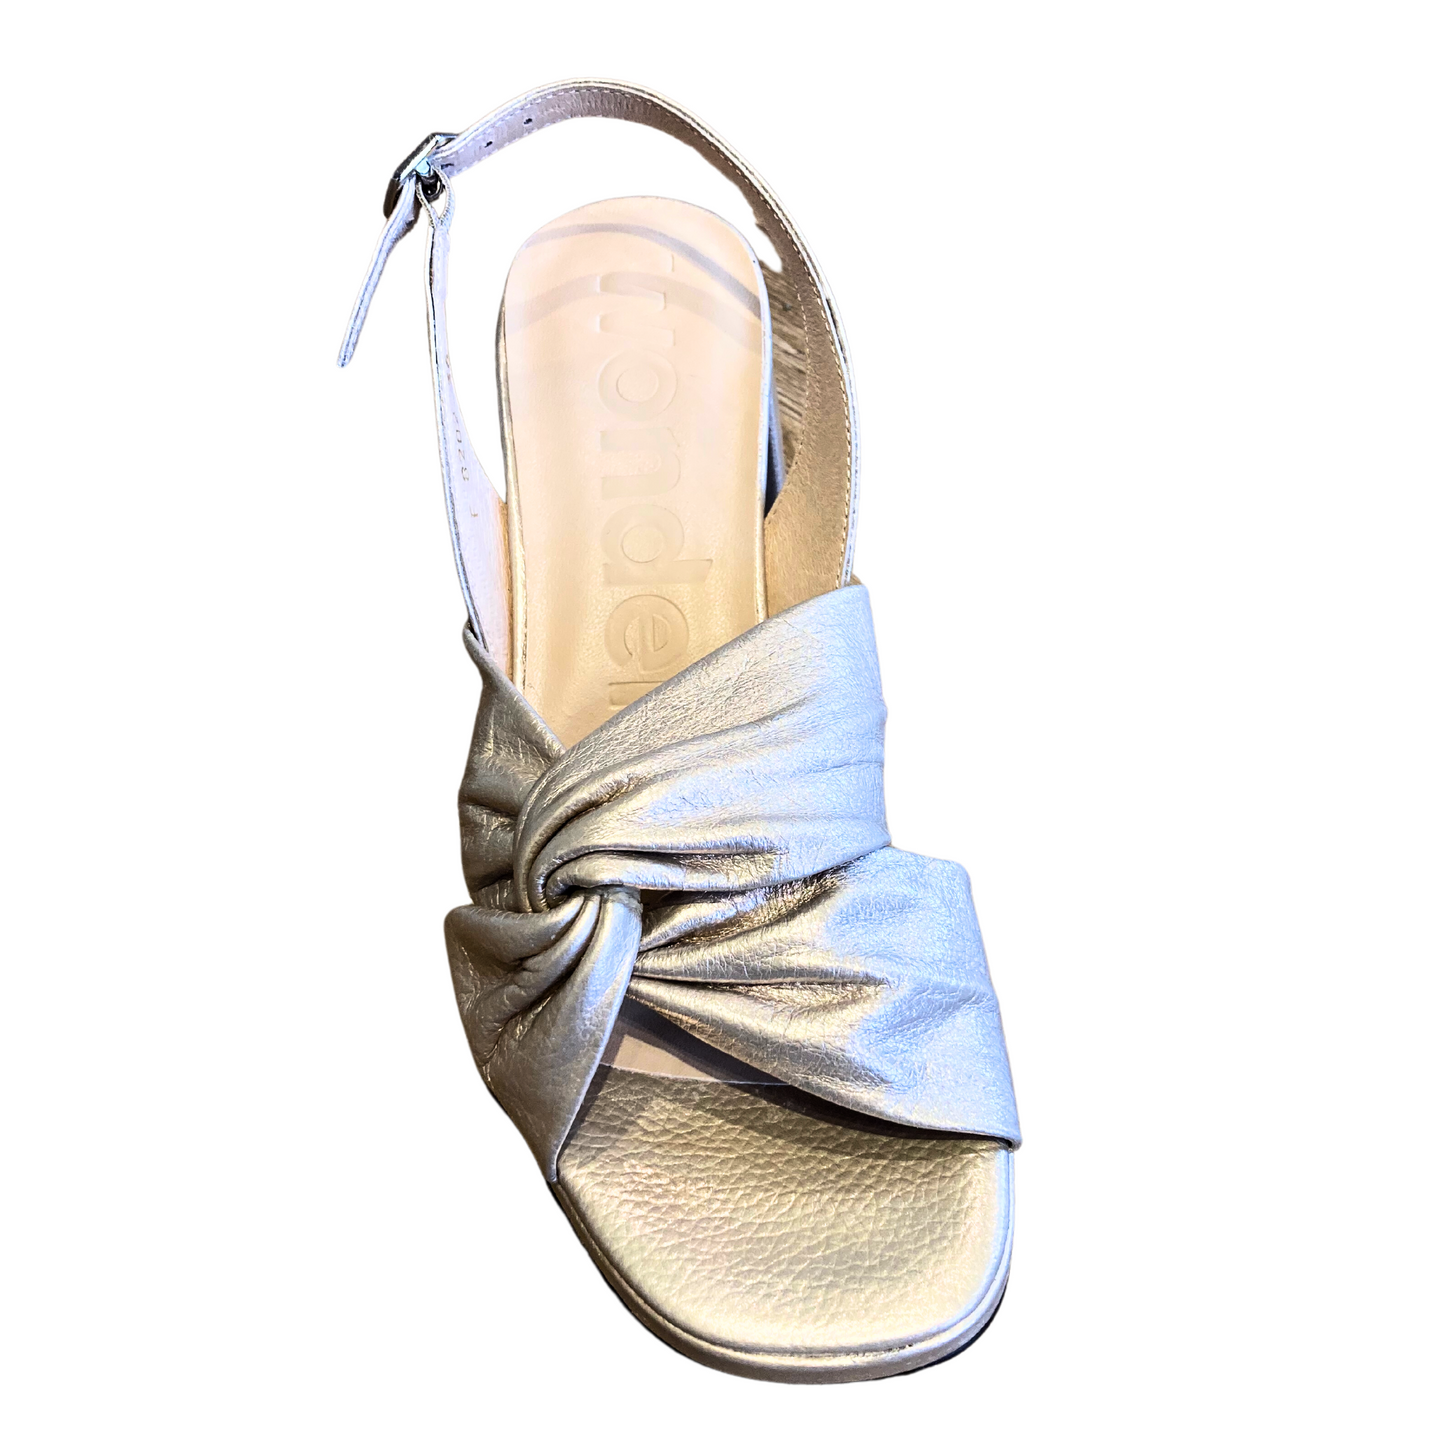 Top down view of open toe sandal in a platinum leather.  Soft leather is wrapped over itself on outside.  Heel strap has adjustable buckle